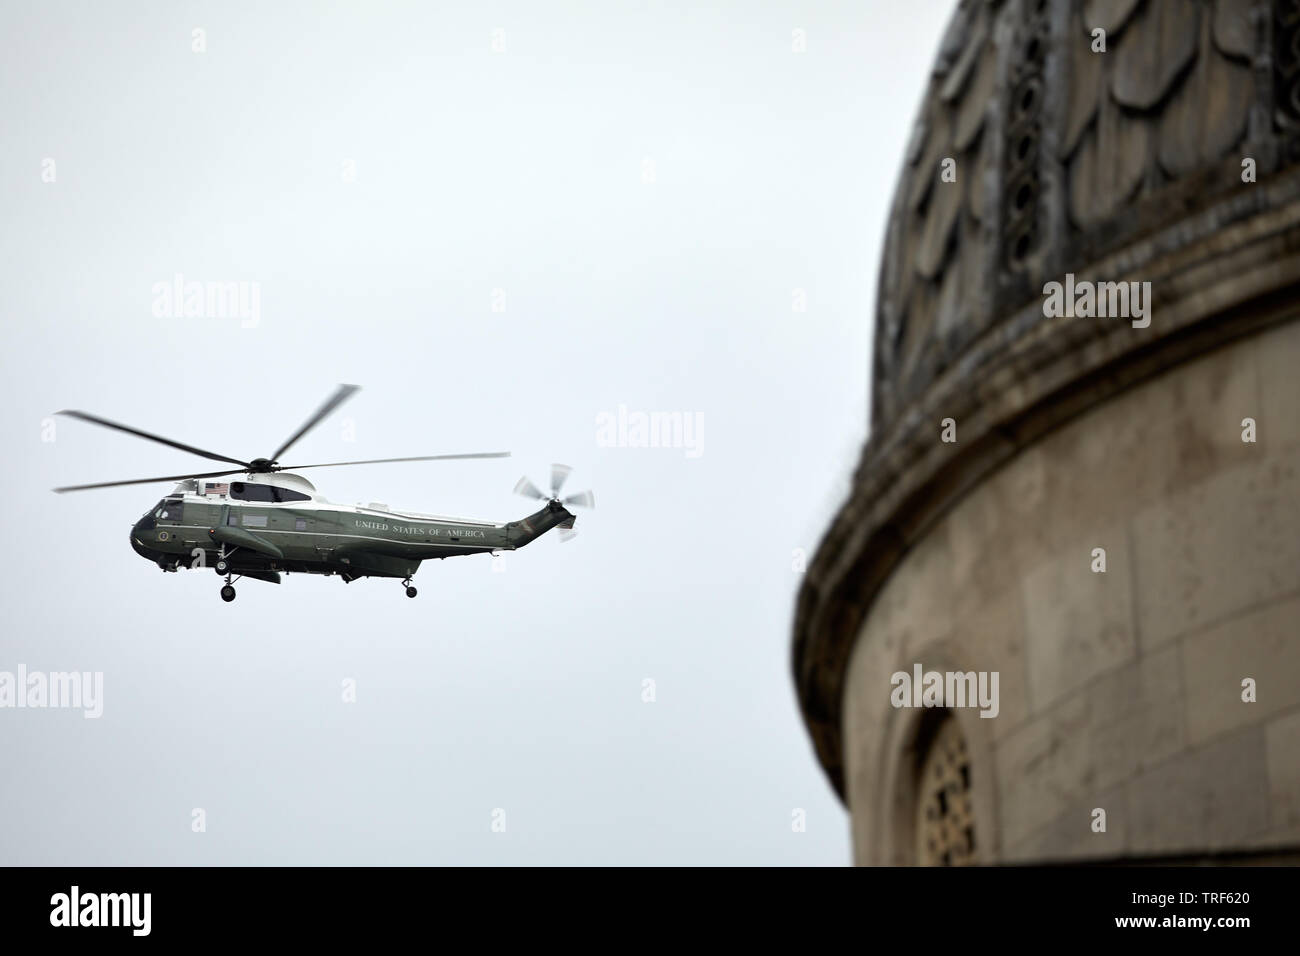 London, UK. - 4 June 2019: Marine One helicopter passing the dome of the National Gallery in Trafalgar Square during the visit of the US President Donald Trump to the UK. Stock Photo